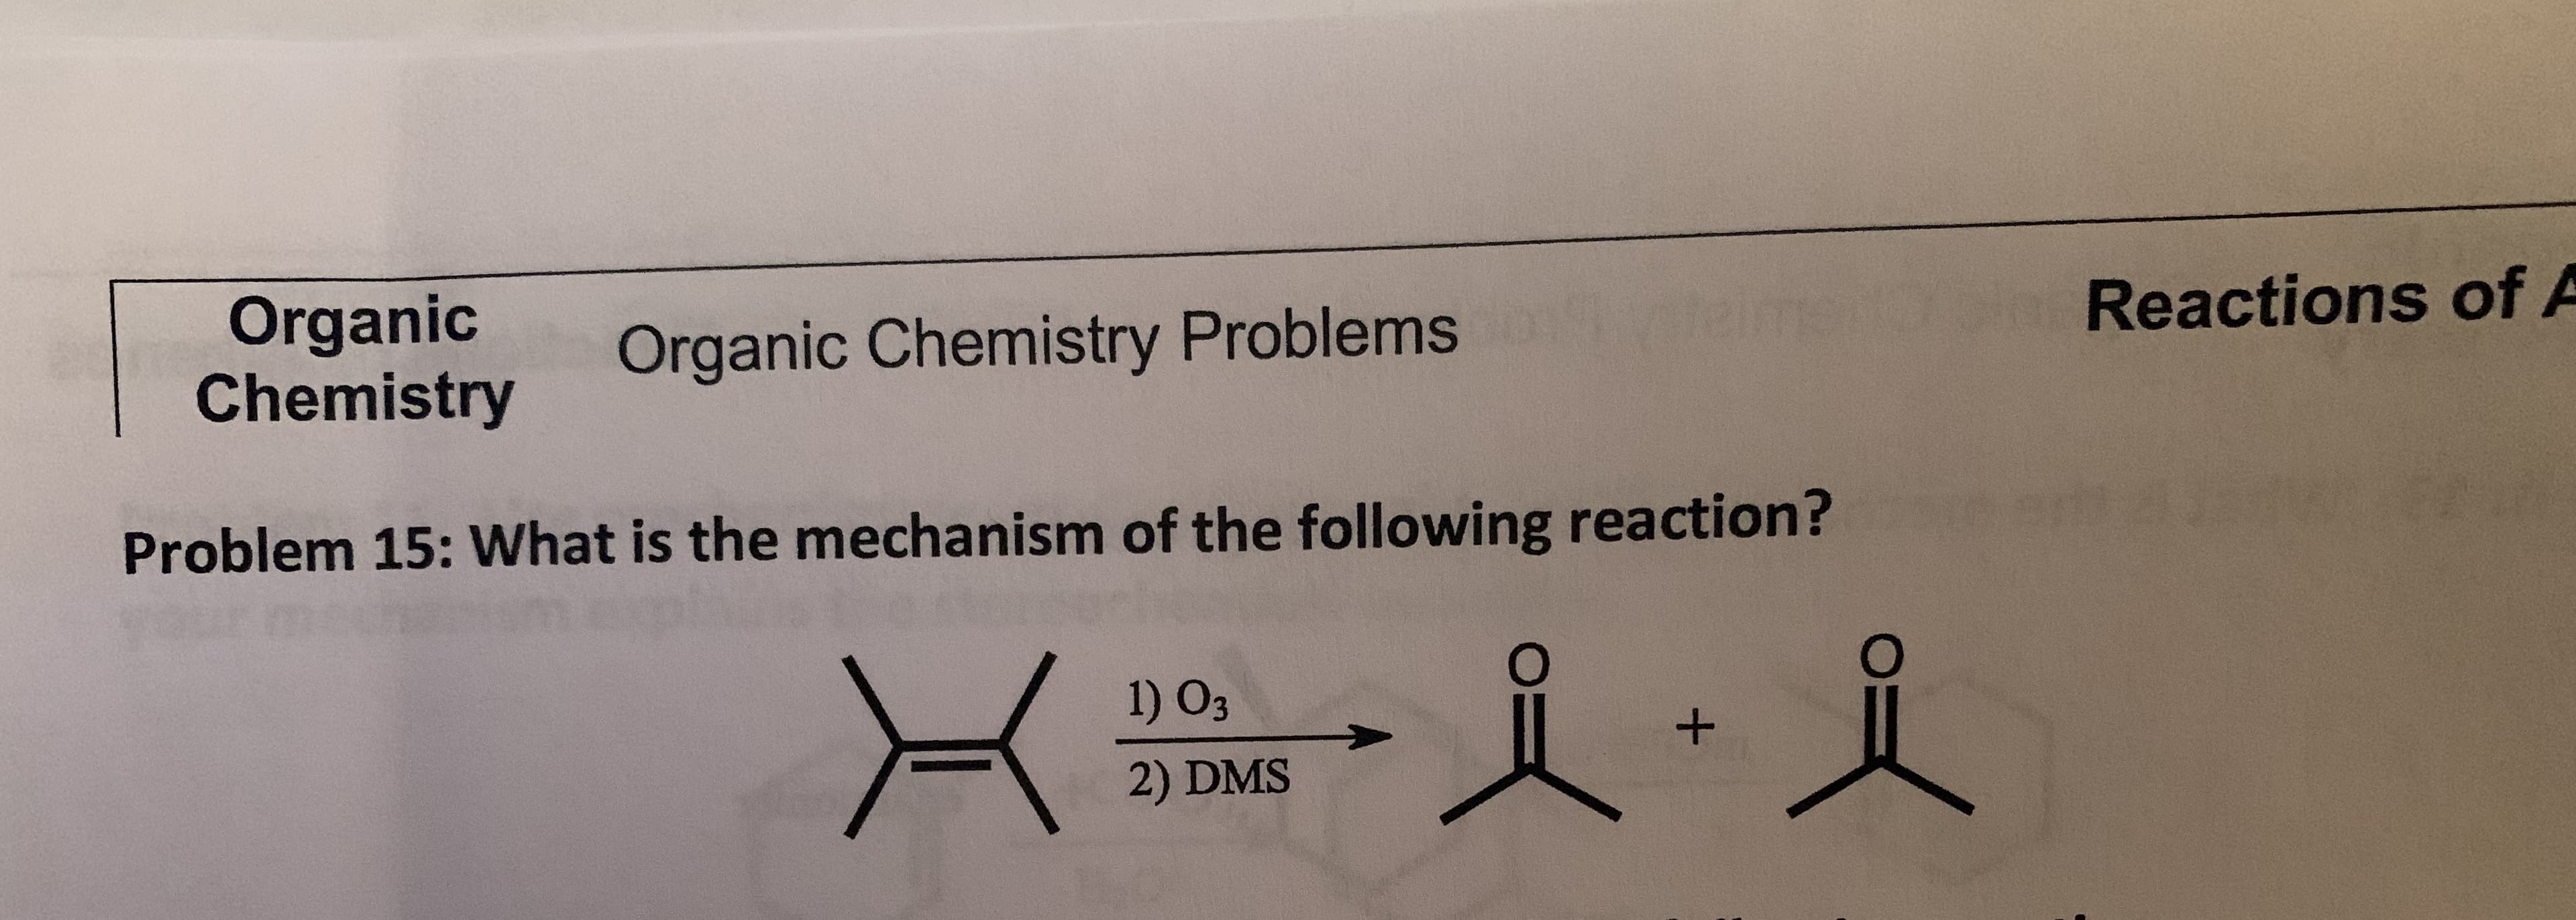 Organic
Chemistry
Reactions of A
Organic Chemistry Problems
Problem 15: What is the mechanism of the following reaction?
1) O3
2) DMS
+
